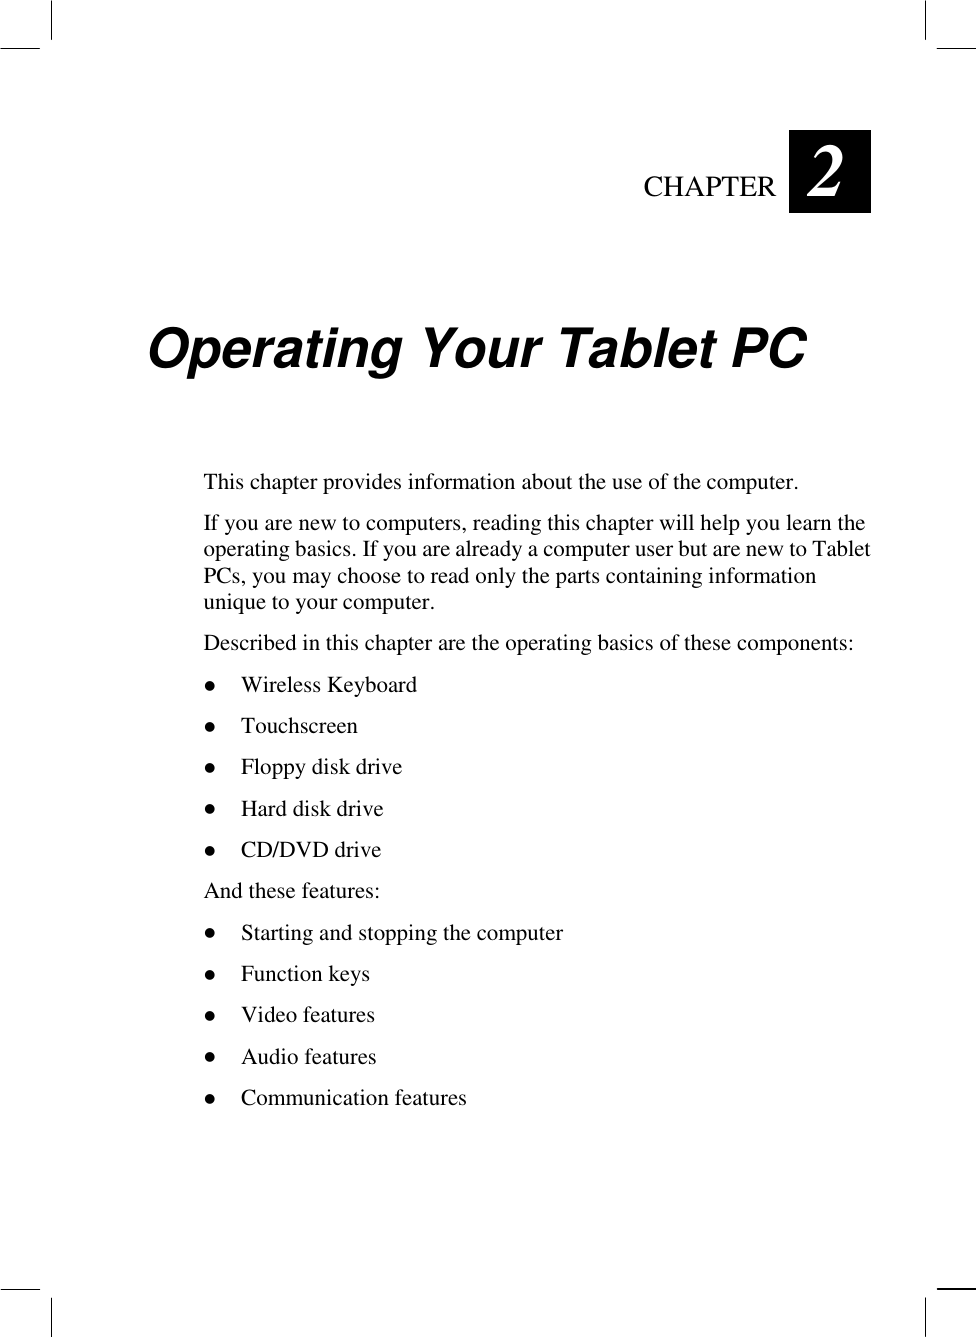   CHAPTER  2 Operating Your Tablet PC This chapter provides information about the use of the computer. If you are new to computers, reading this chapter will help you learn the operating basics. If you are already a computer user but are new to Tablet PCs, you may choose to read only the parts containing information unique to your computer. Described in this chapter are the operating basics of these components: !  Wireless Keyboard !  Touchscreen !  Floppy disk drive !  Hard disk drive !  CD/DVD drive And these features: !  Starting and stopping the computer !  Function keys !  Video features !  Audio features !  Communication features  